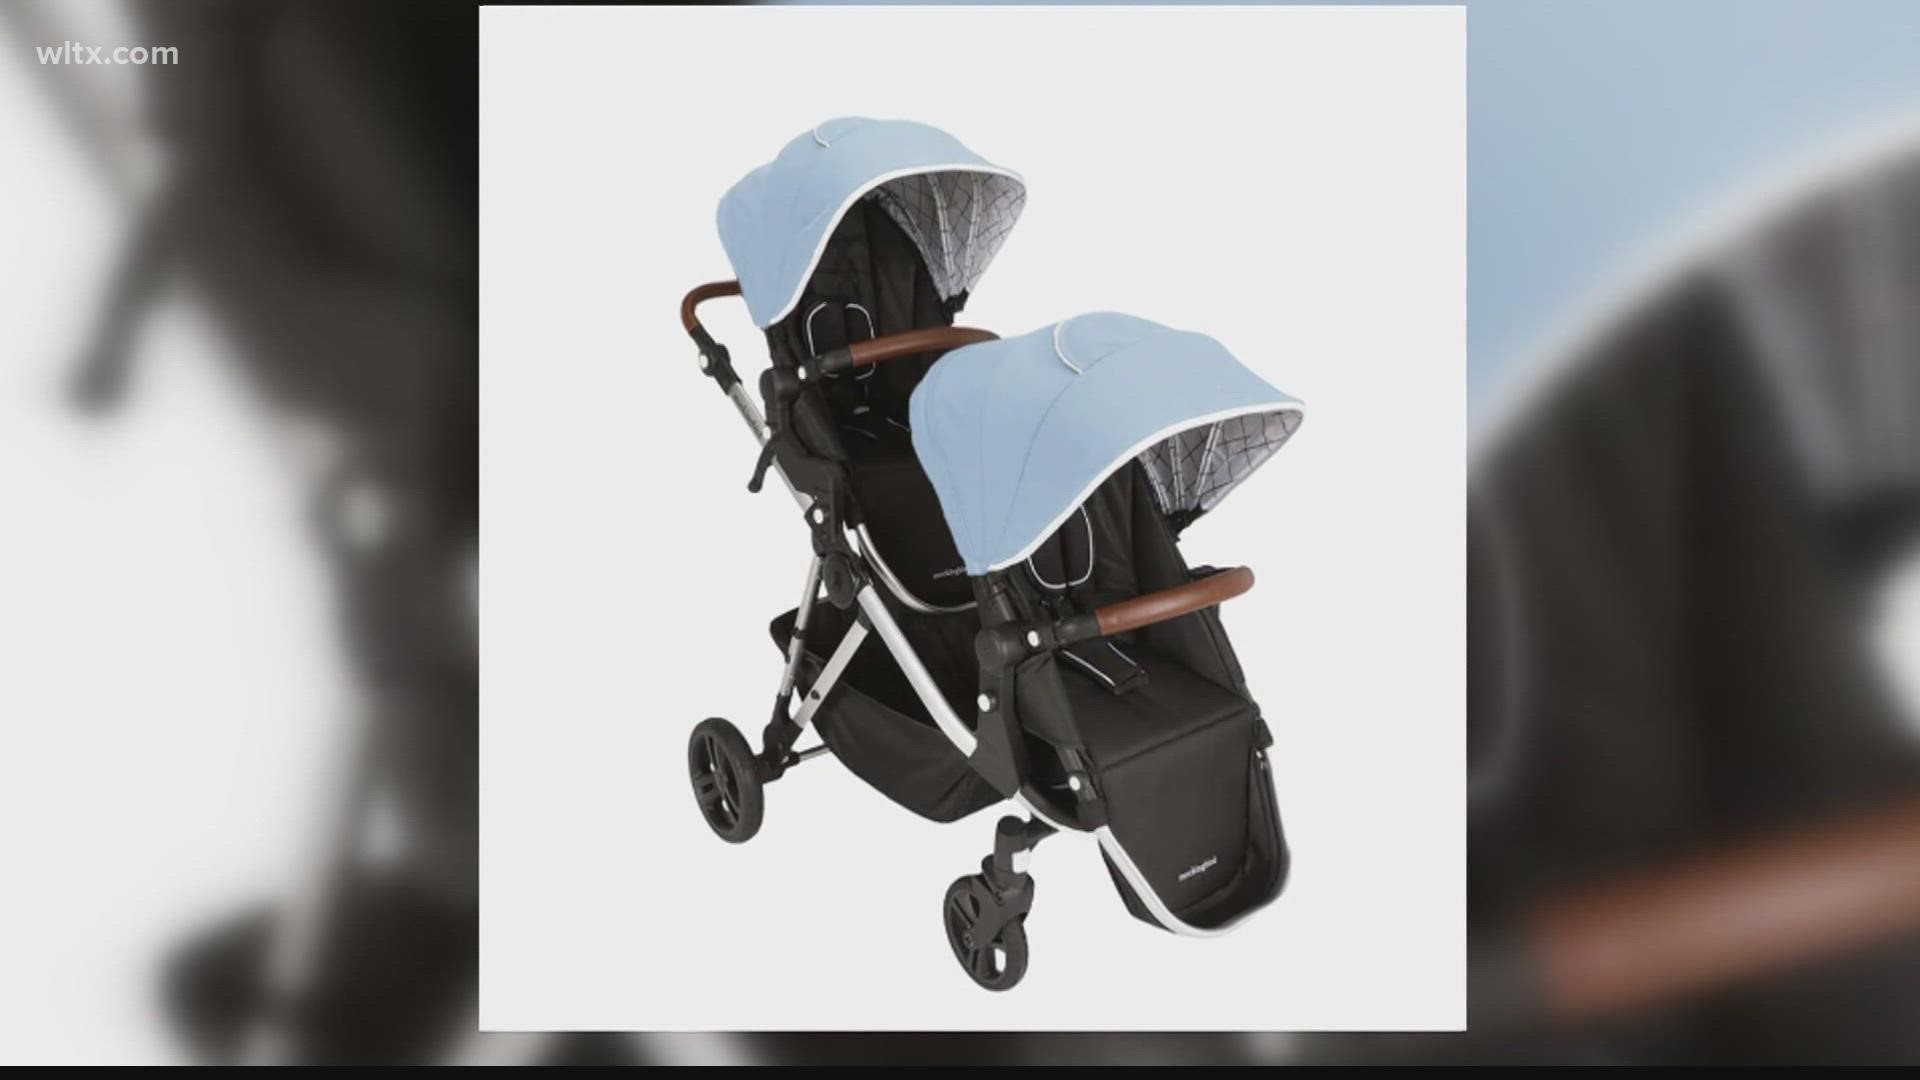 There have been 138 reports of cracks in the single-to-double strollers' frame, which can injure or cause children to fall.